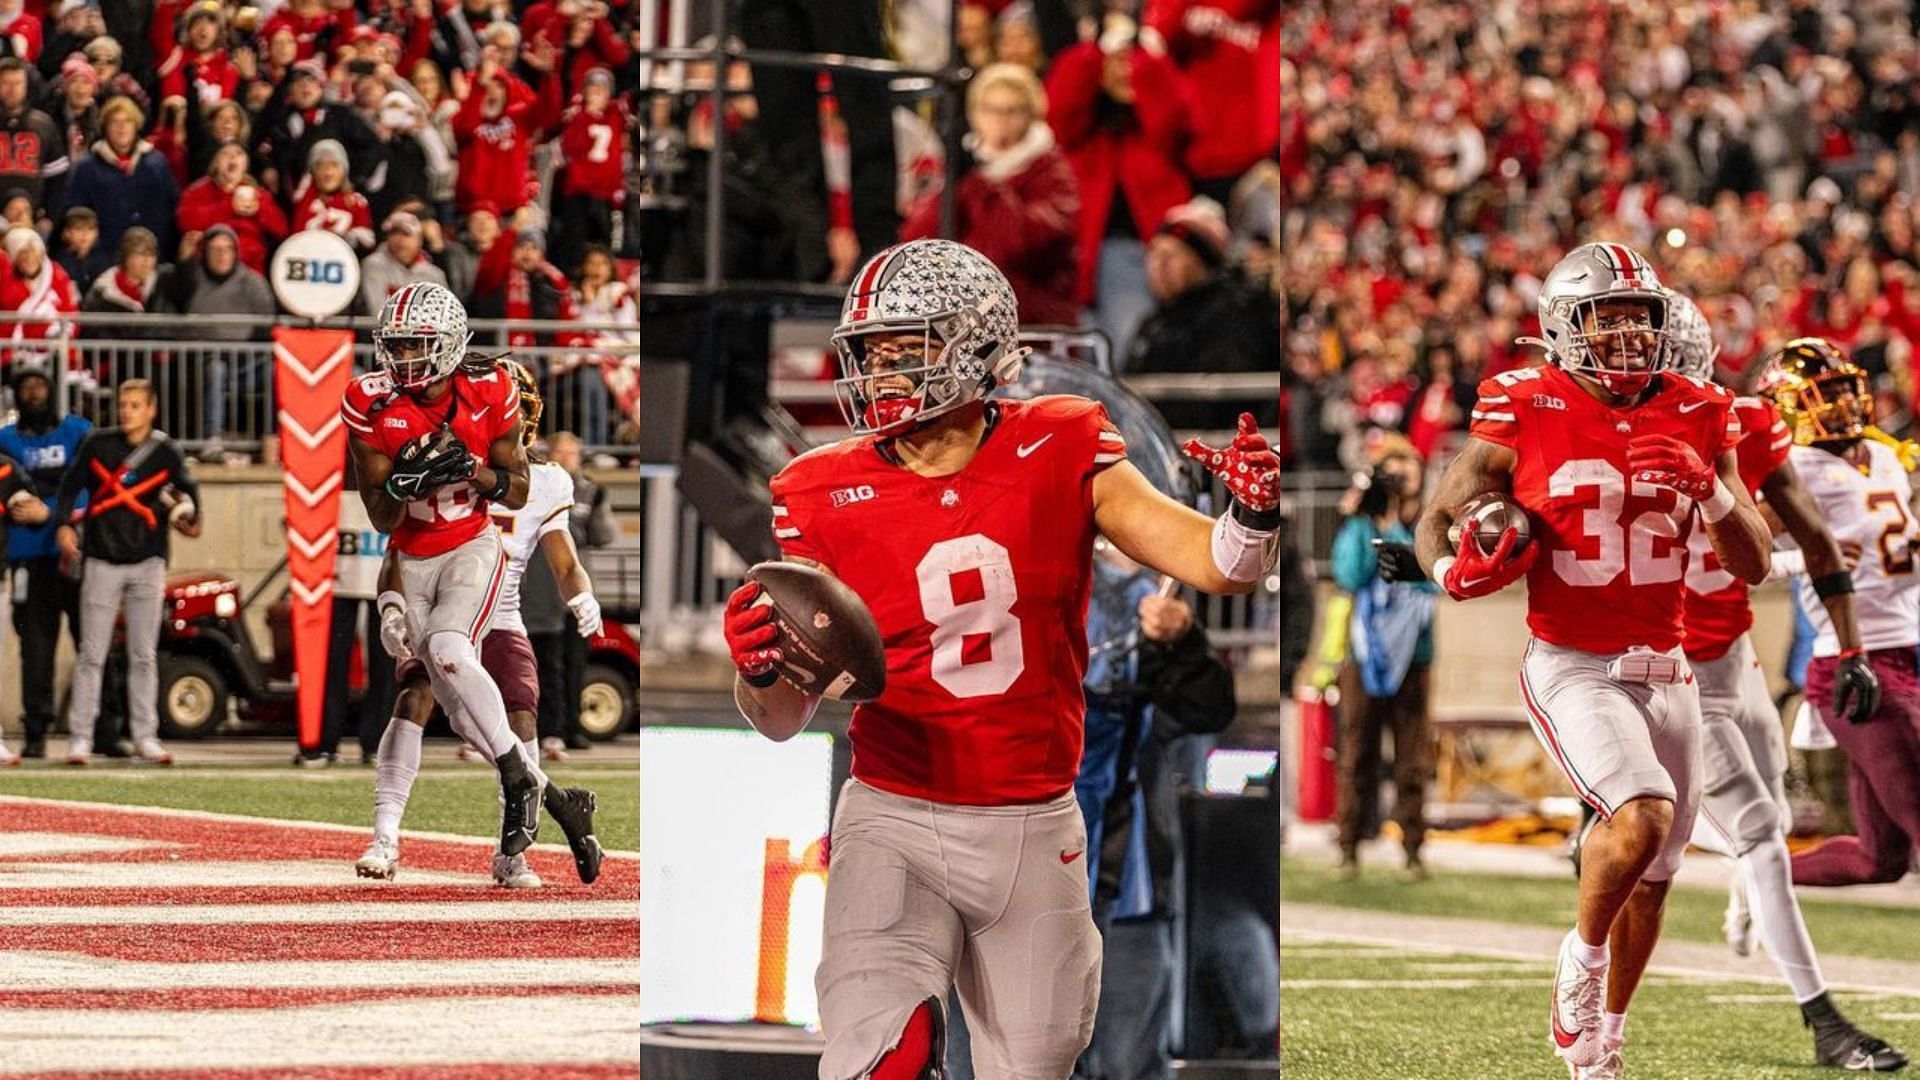 Ohio State should be considered a favorite for this year